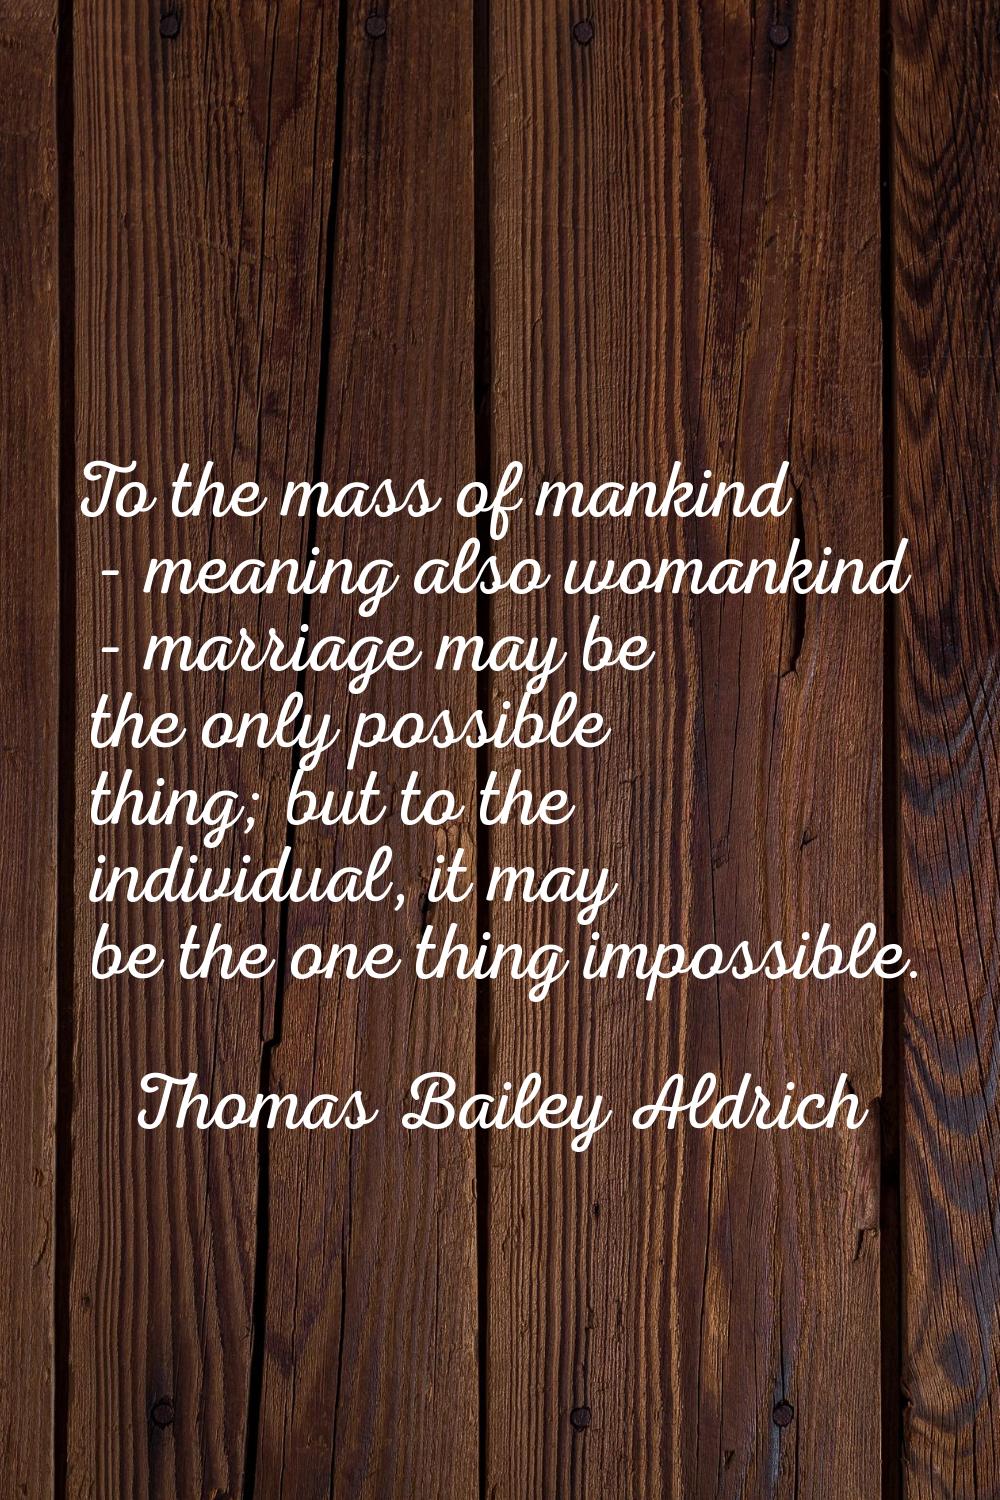 To the mass of mankind - meaning also womankind - marriage may be the only possible thing; but to t